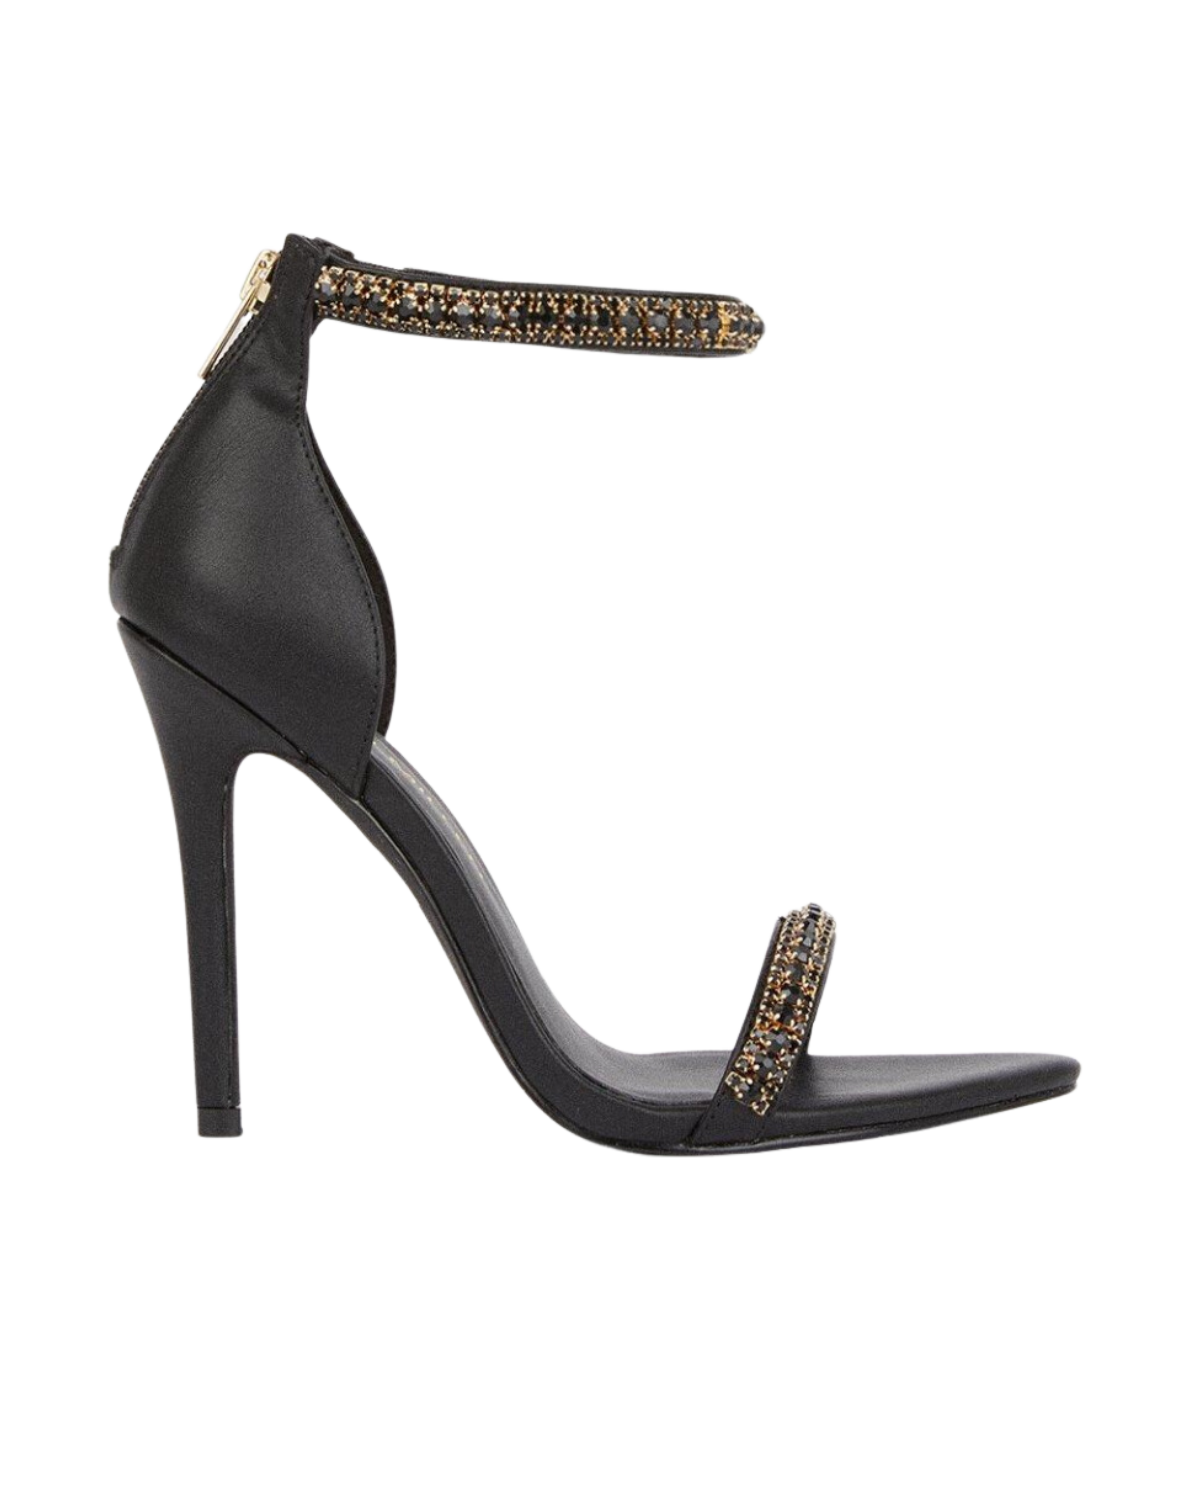 black leather heel with gold detail on straps